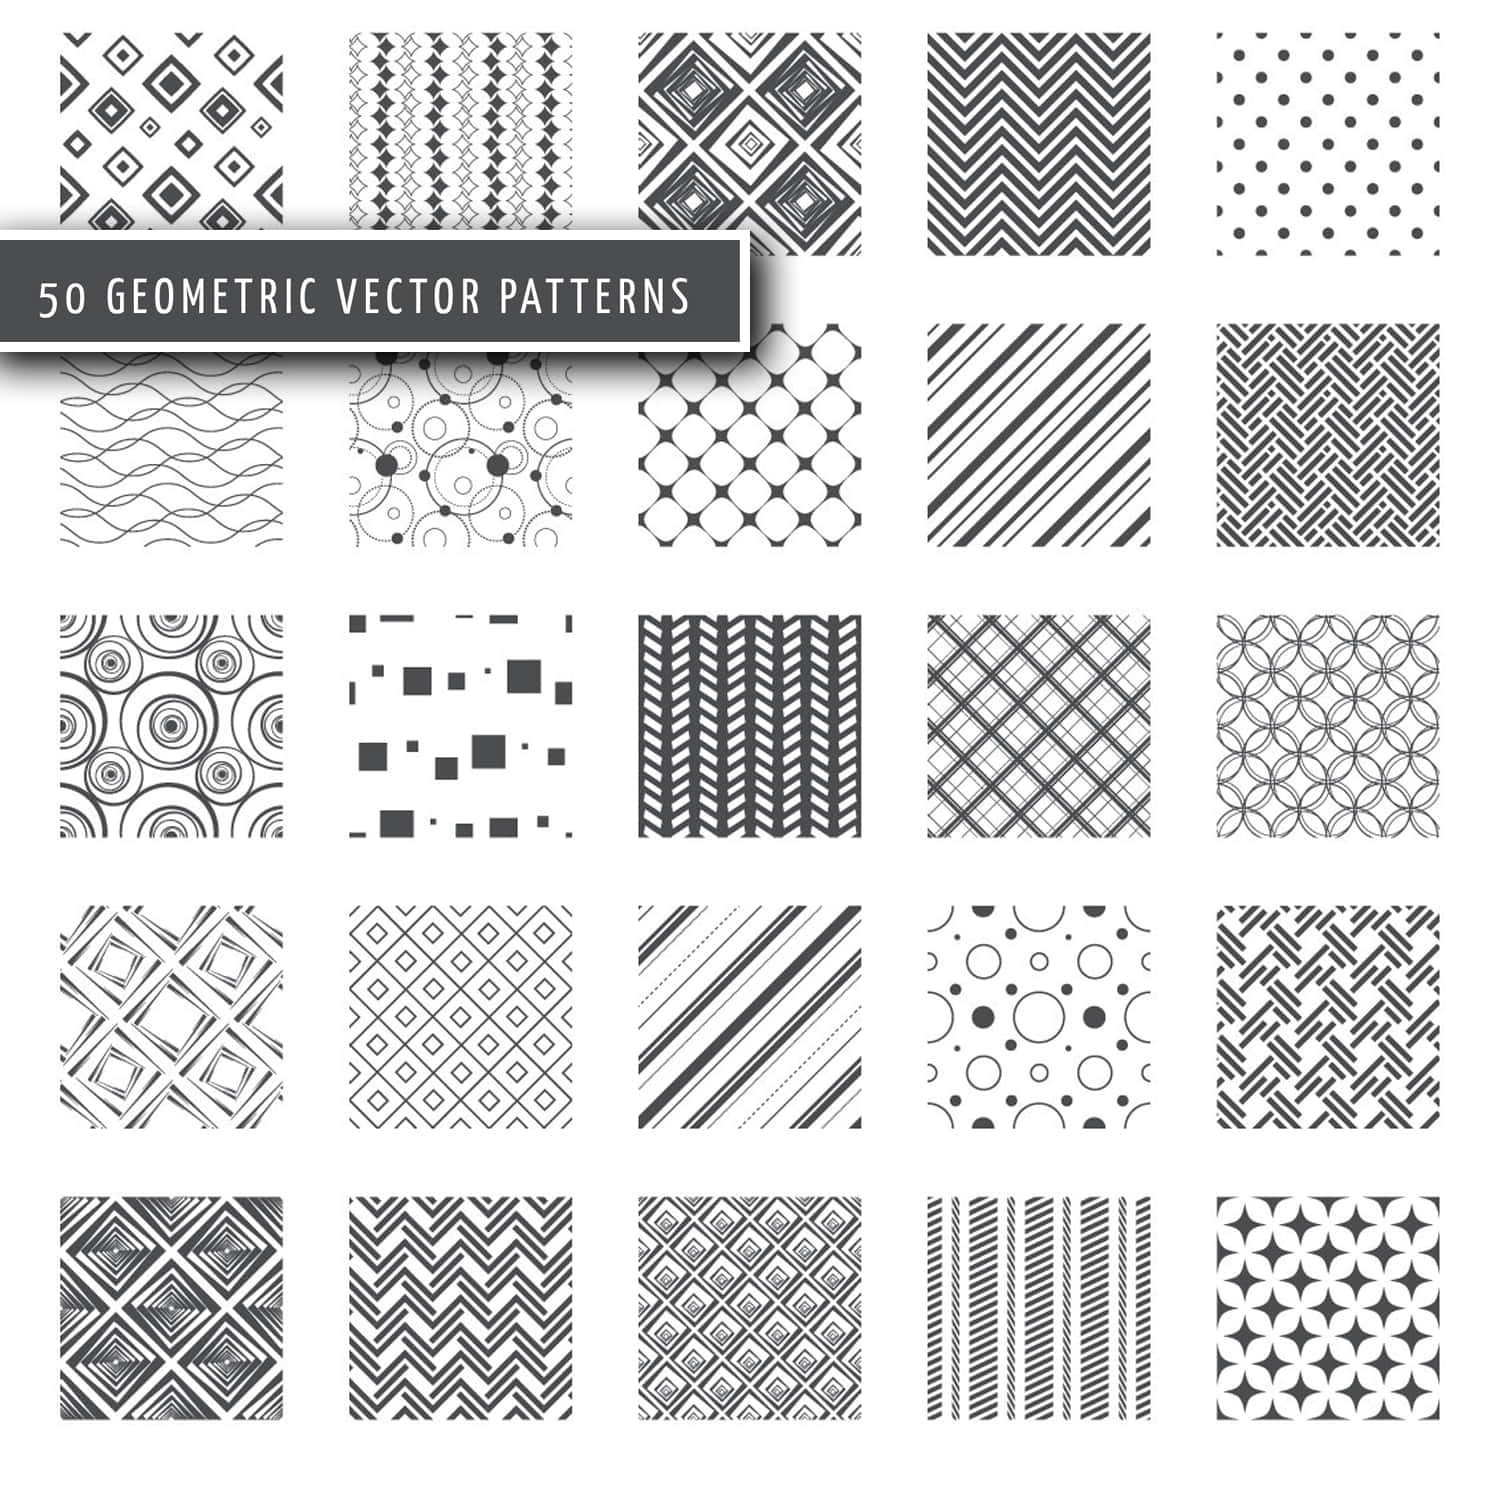 Get Creative With This Vibrant Geometric Pattern